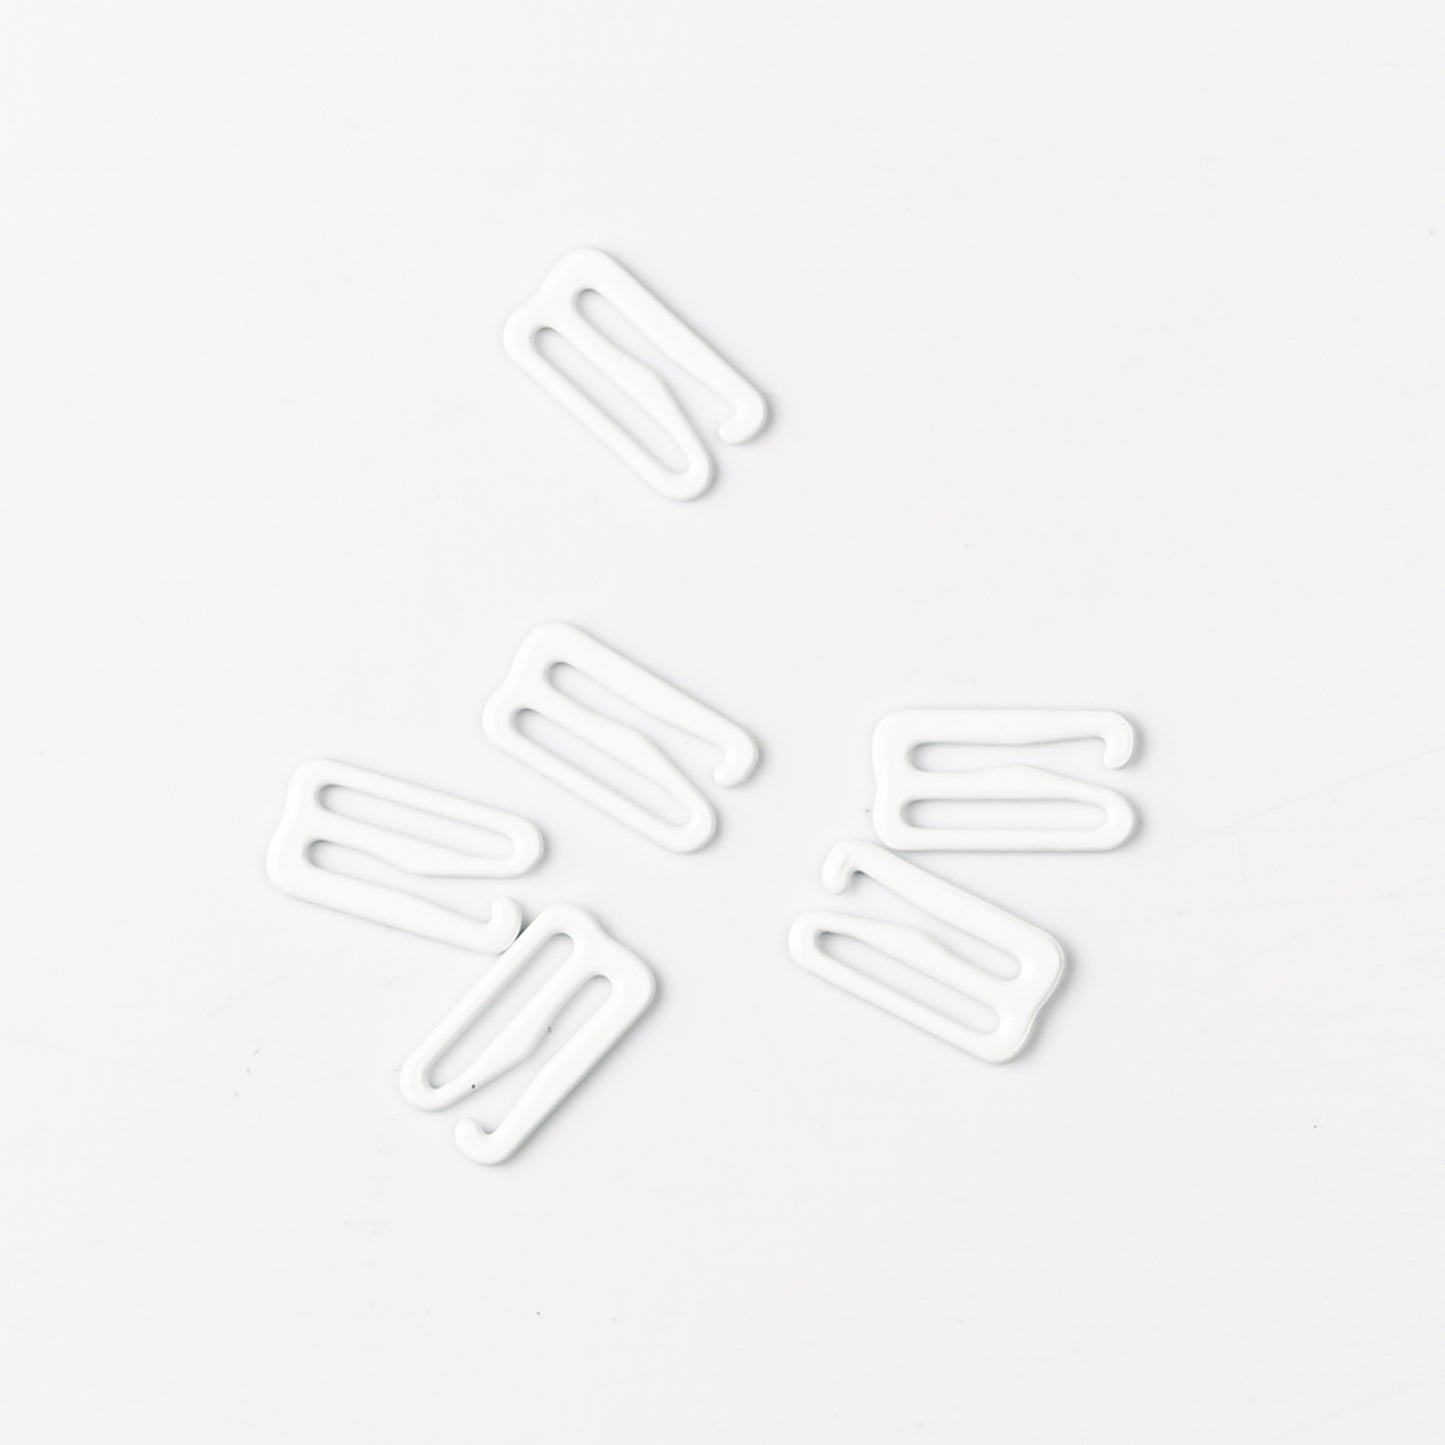 Bra Accessories Hook 15mm Black & White - TO BE DISCONTINUED